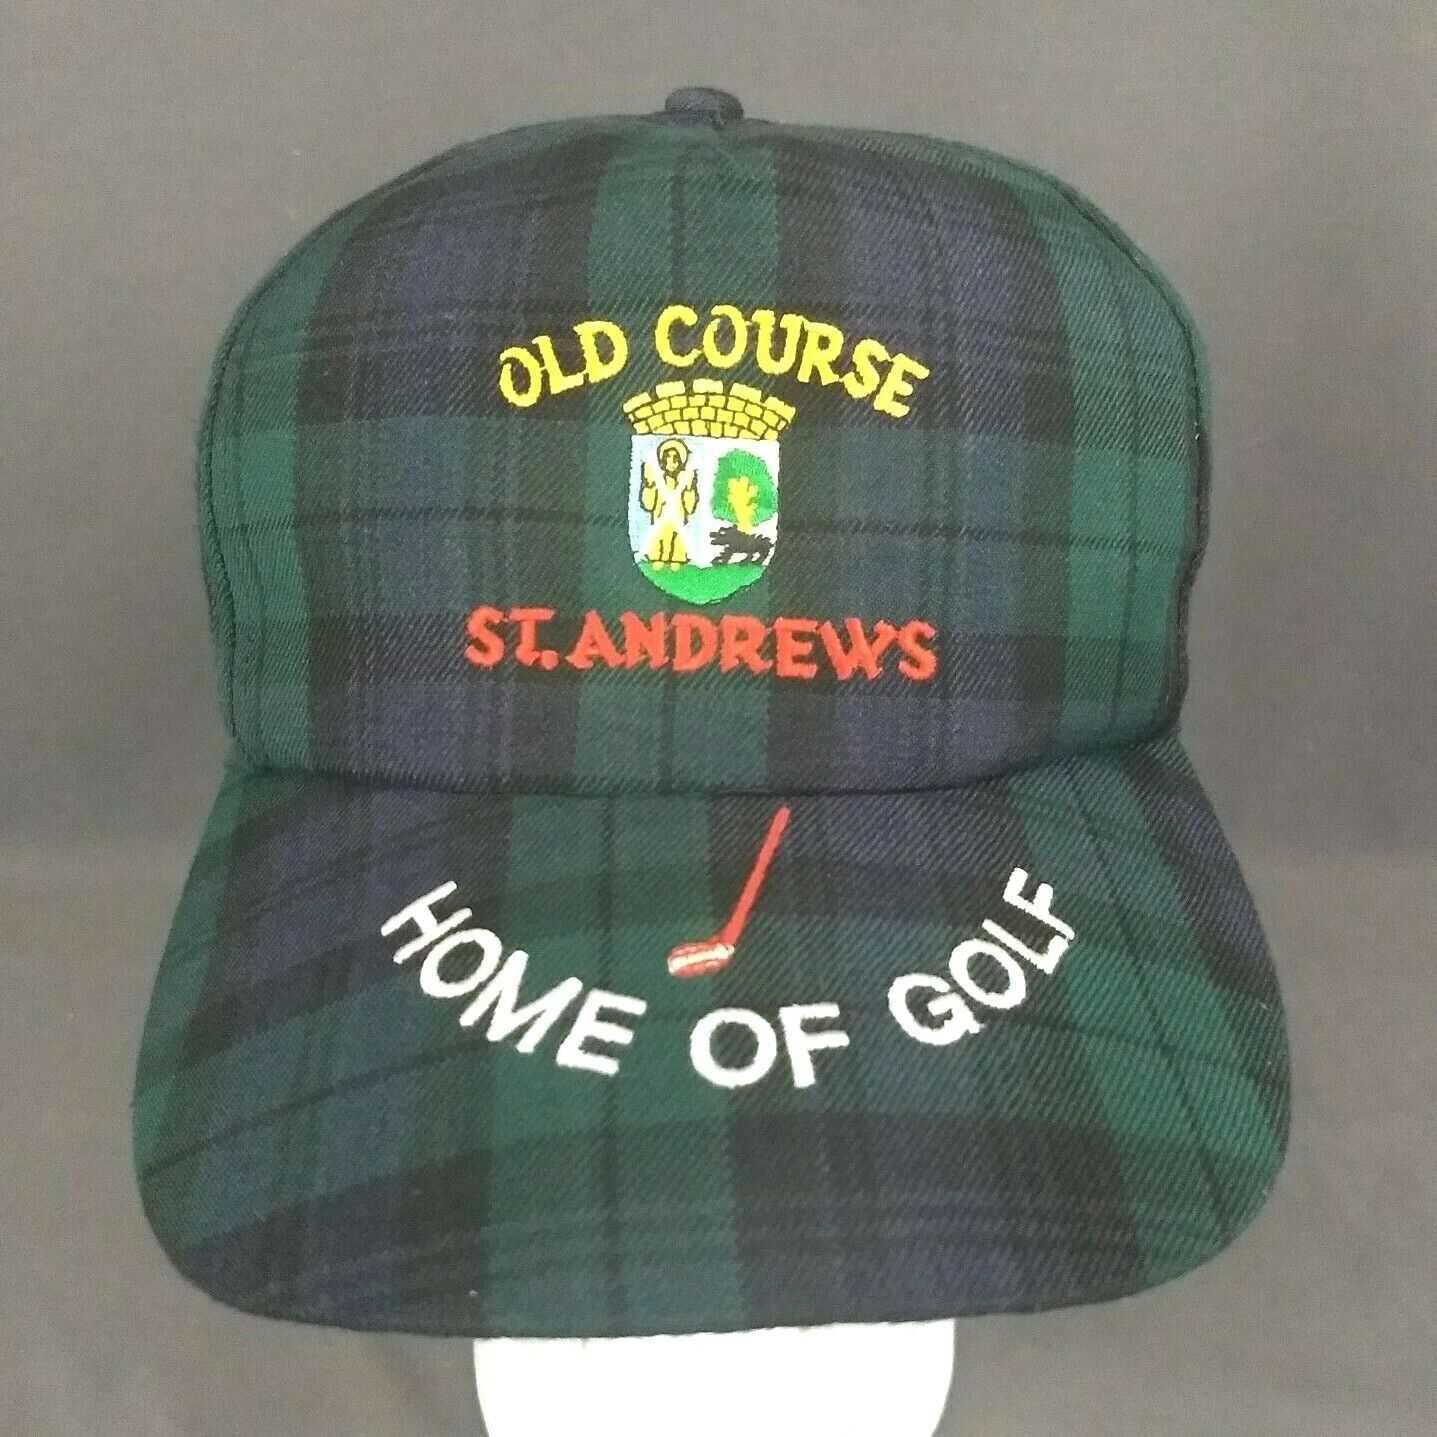 Old Course St. Andrews Strapback Hat Tartan Cap The Home of Go...